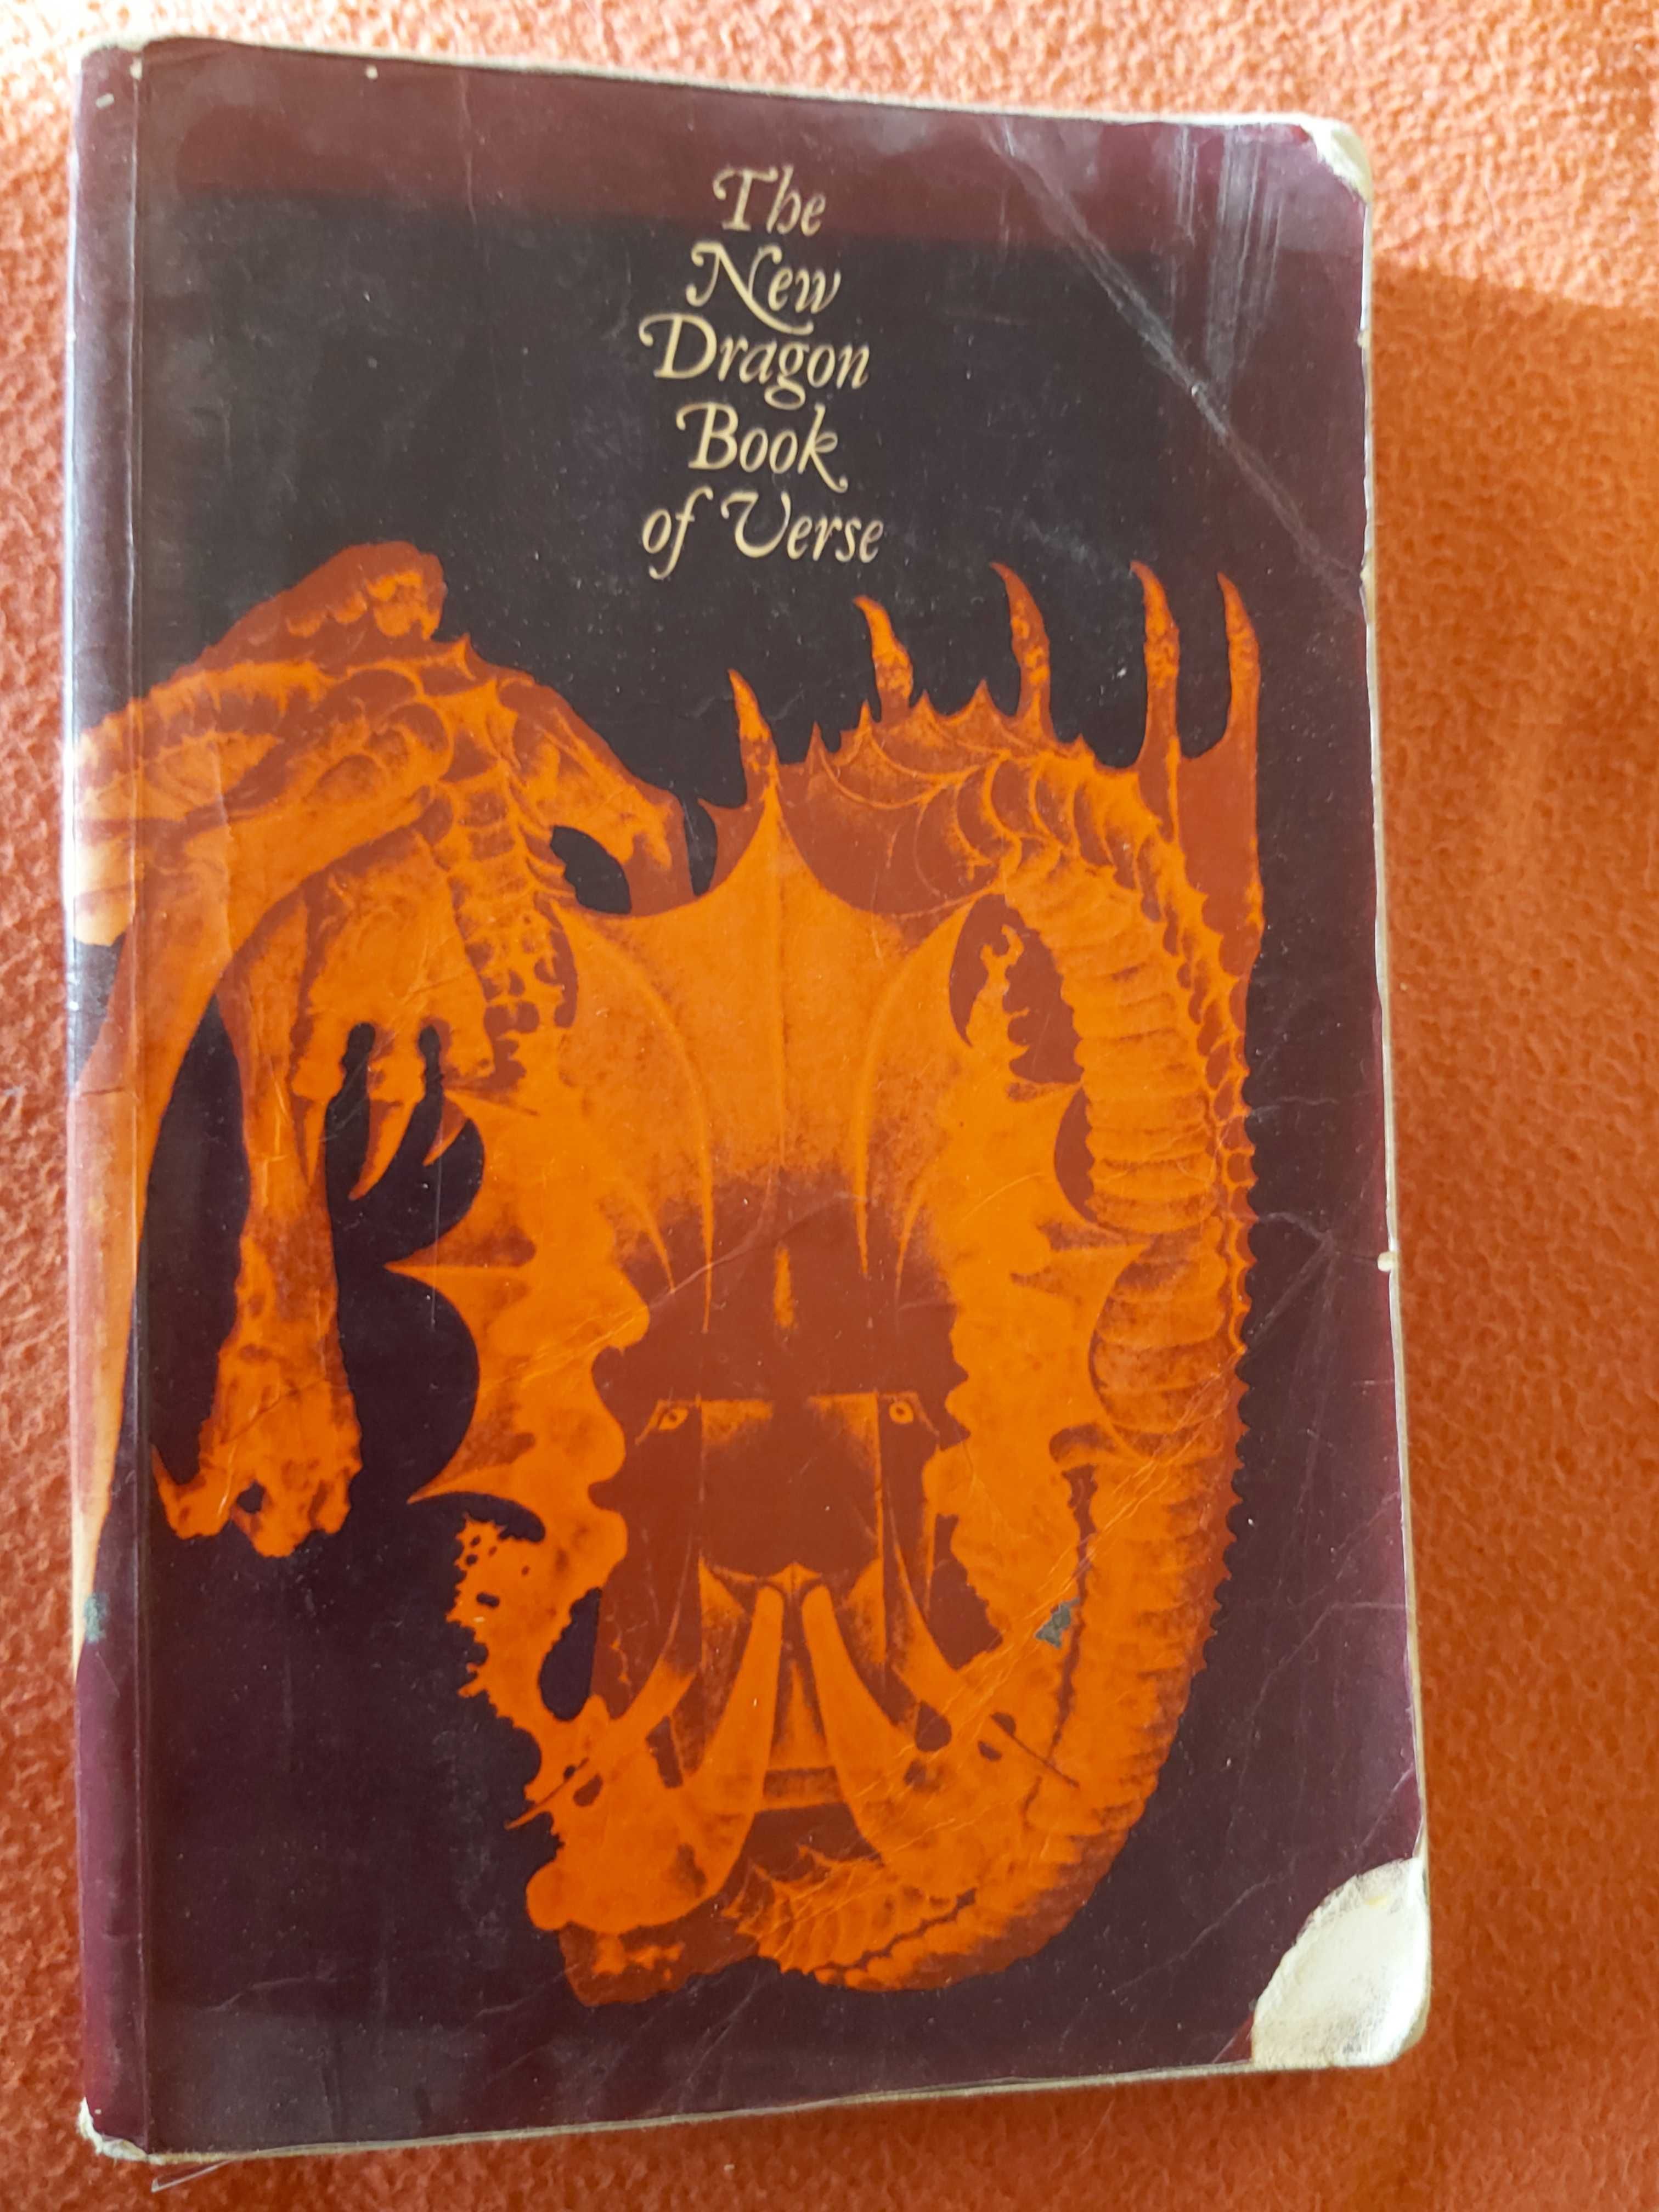 The New Dragon Book of Verse